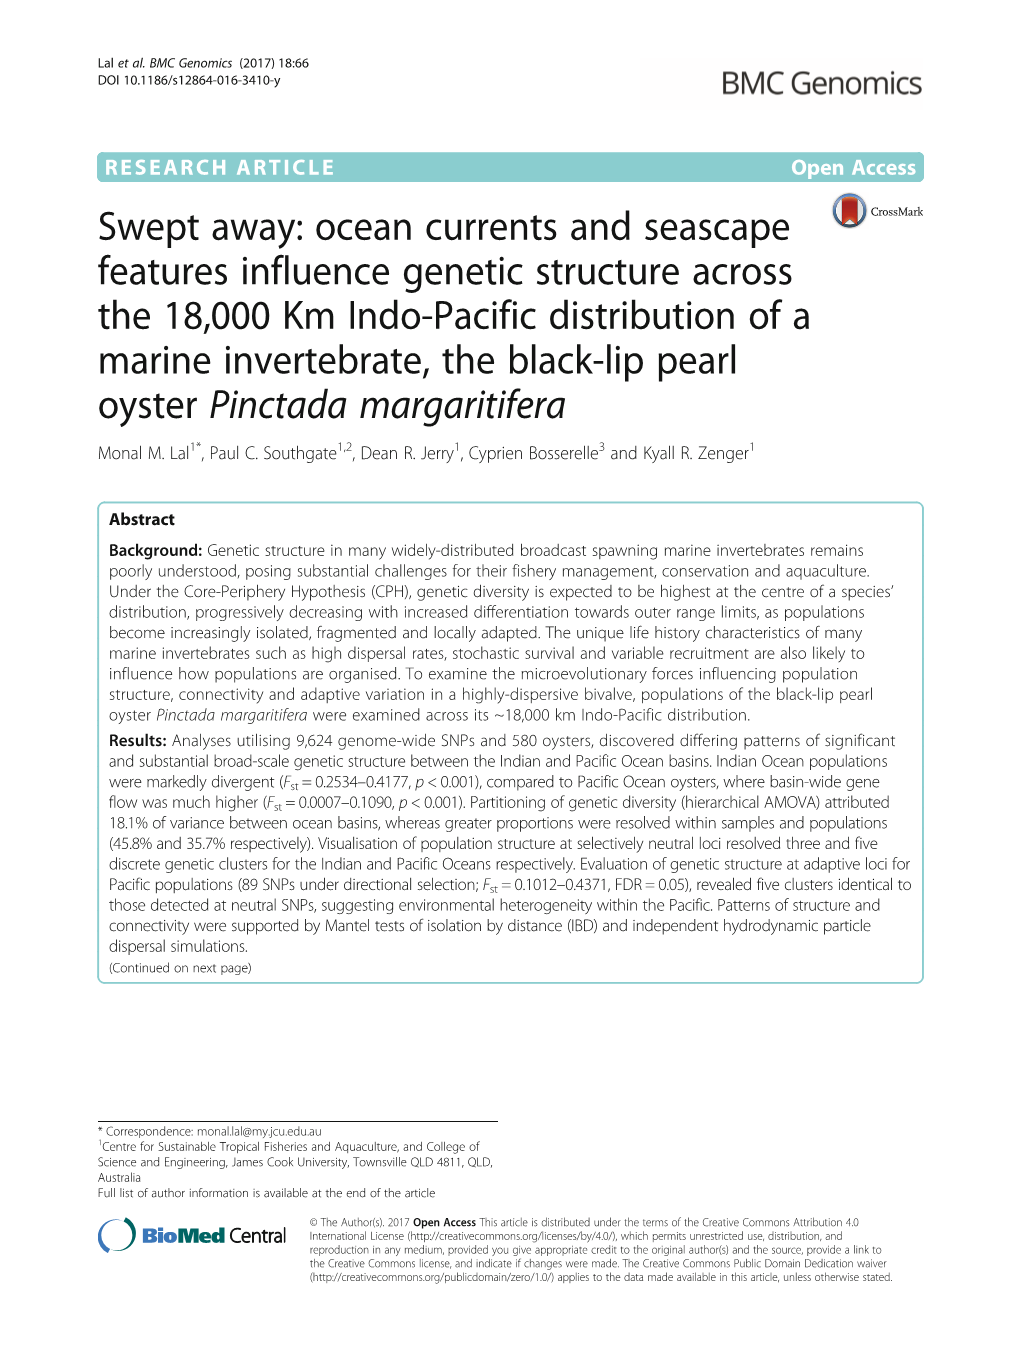 Ocean Currents and Seascape Features